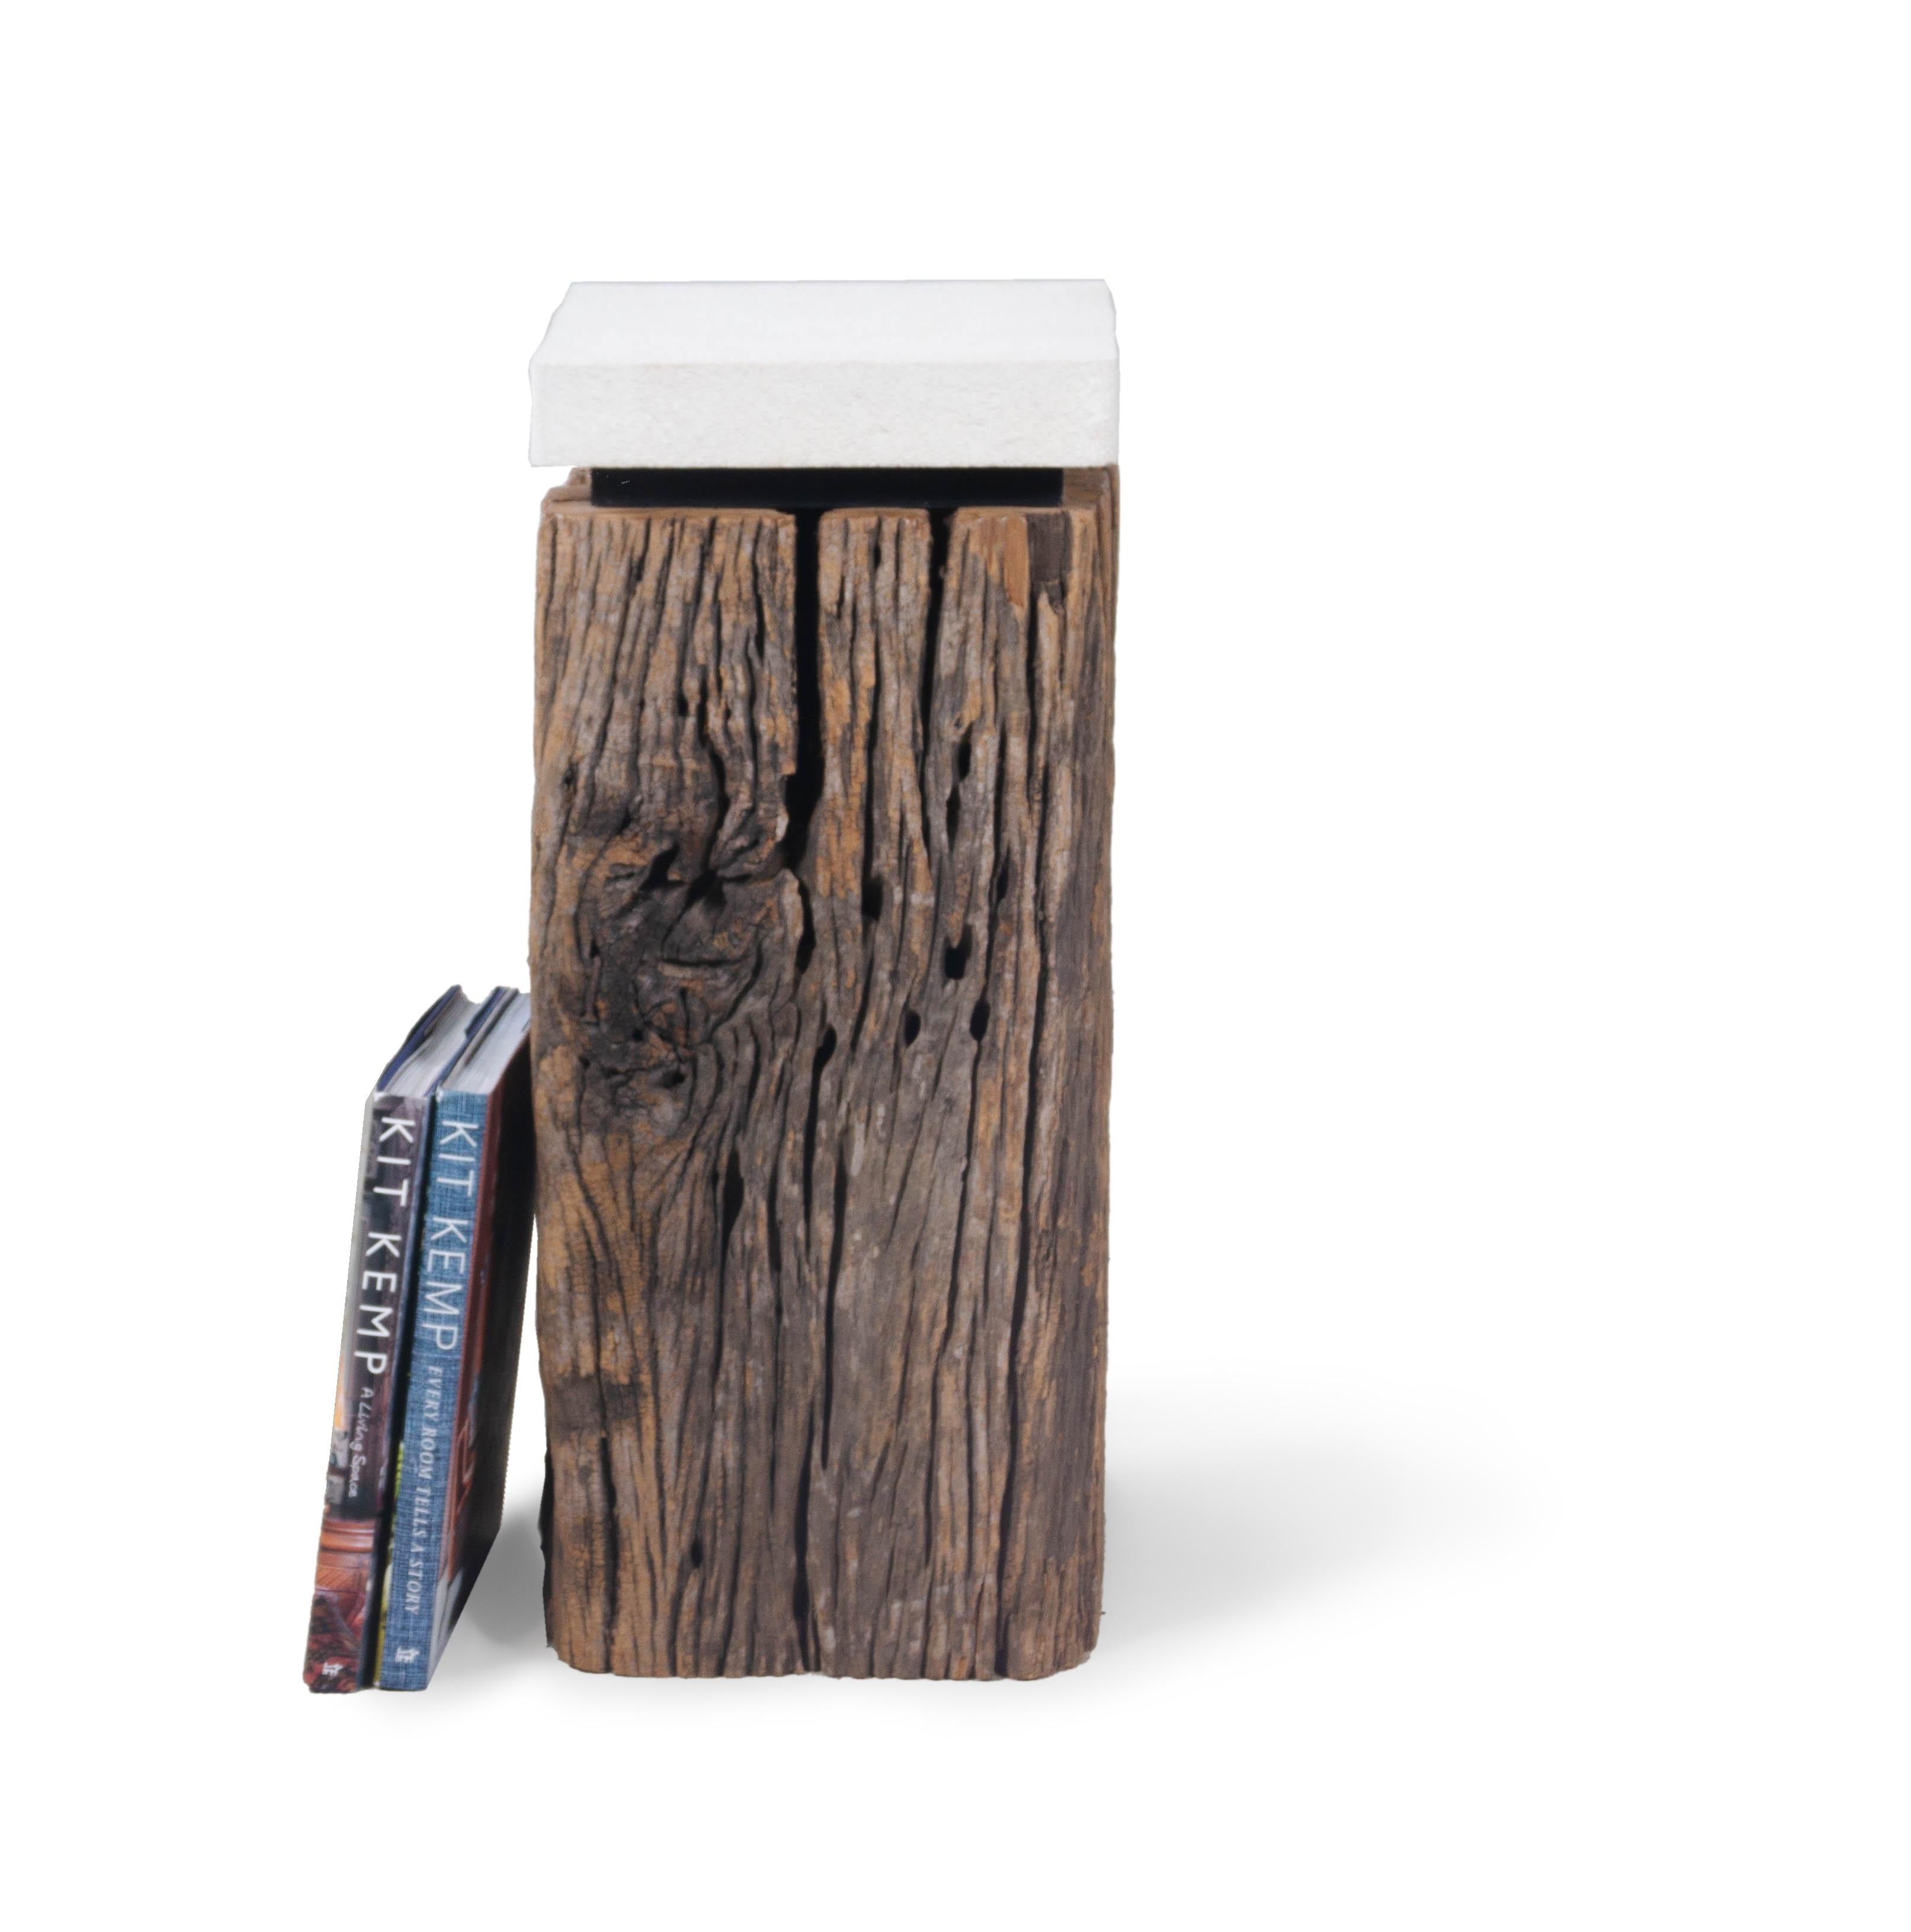 This end table is made from a mildly weathered canal posts that features beautiful fissures that add organic texture and interest to any room. The wood features a rich walnut tone that marries perfectly with warm and cool color palettes. This walnut